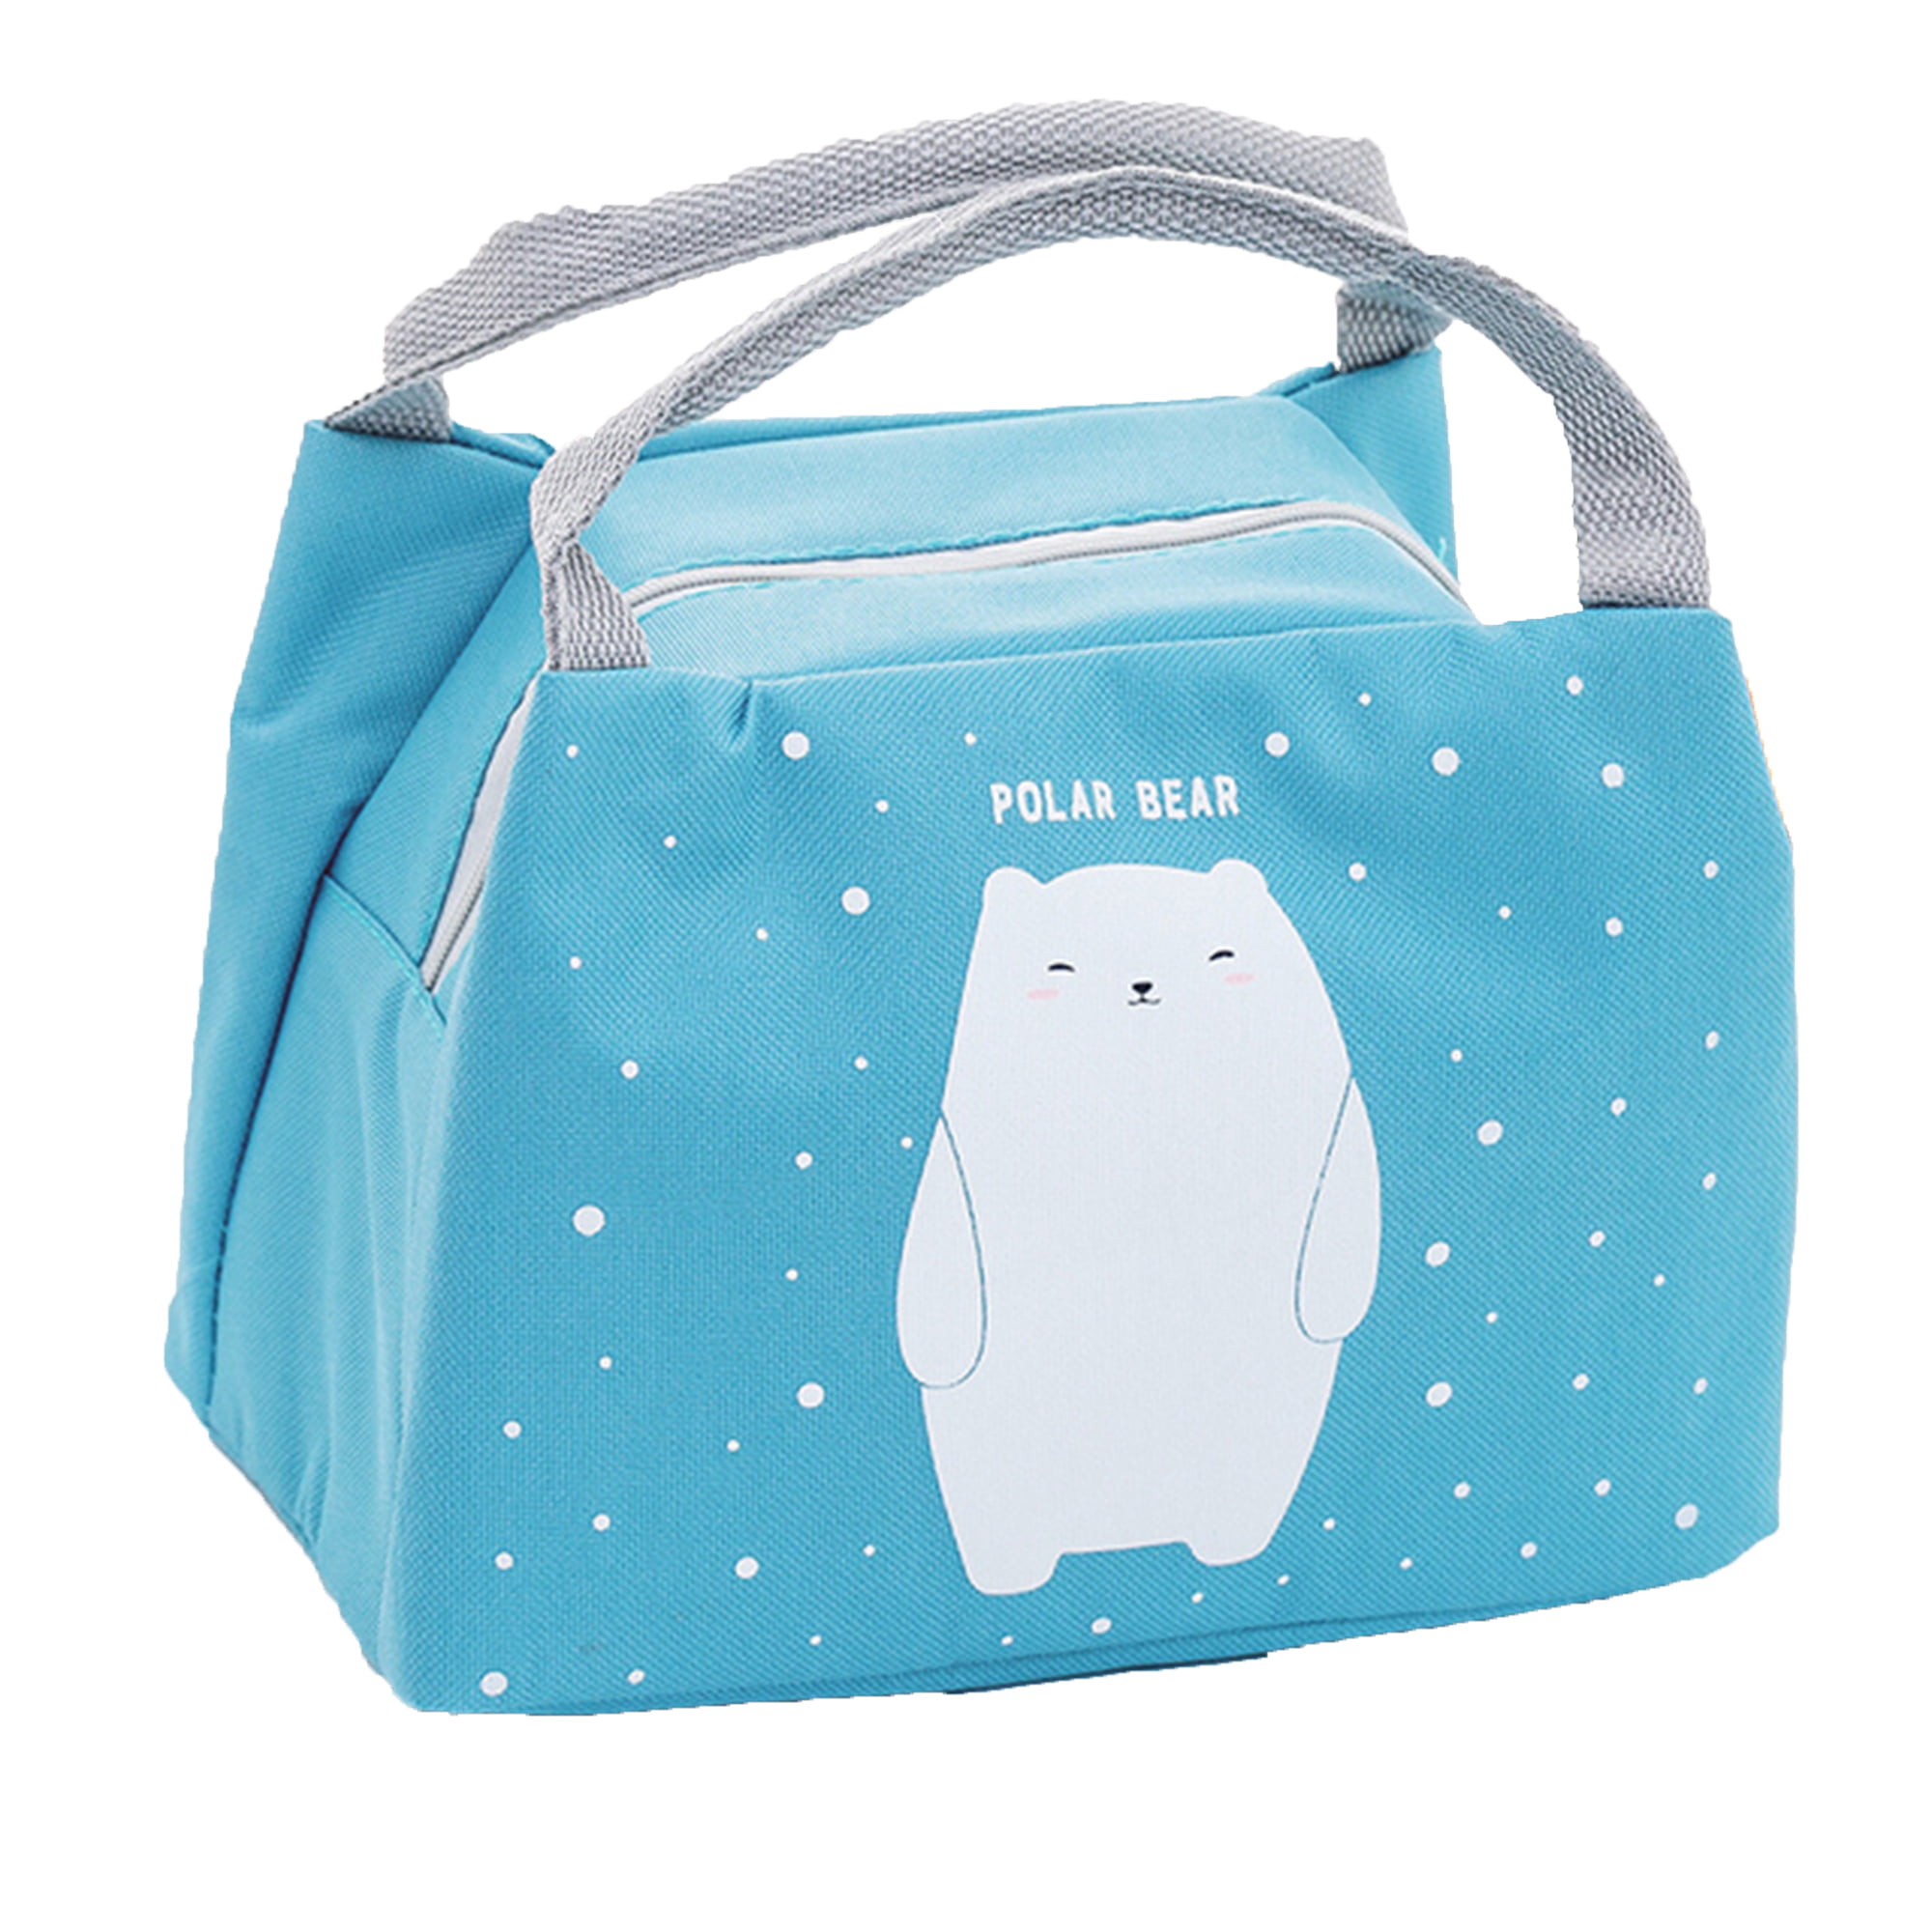 Details about   US Thermal Cooler Insulated Lunch Portable Carry Storage Tote Picnic Lunch Box 